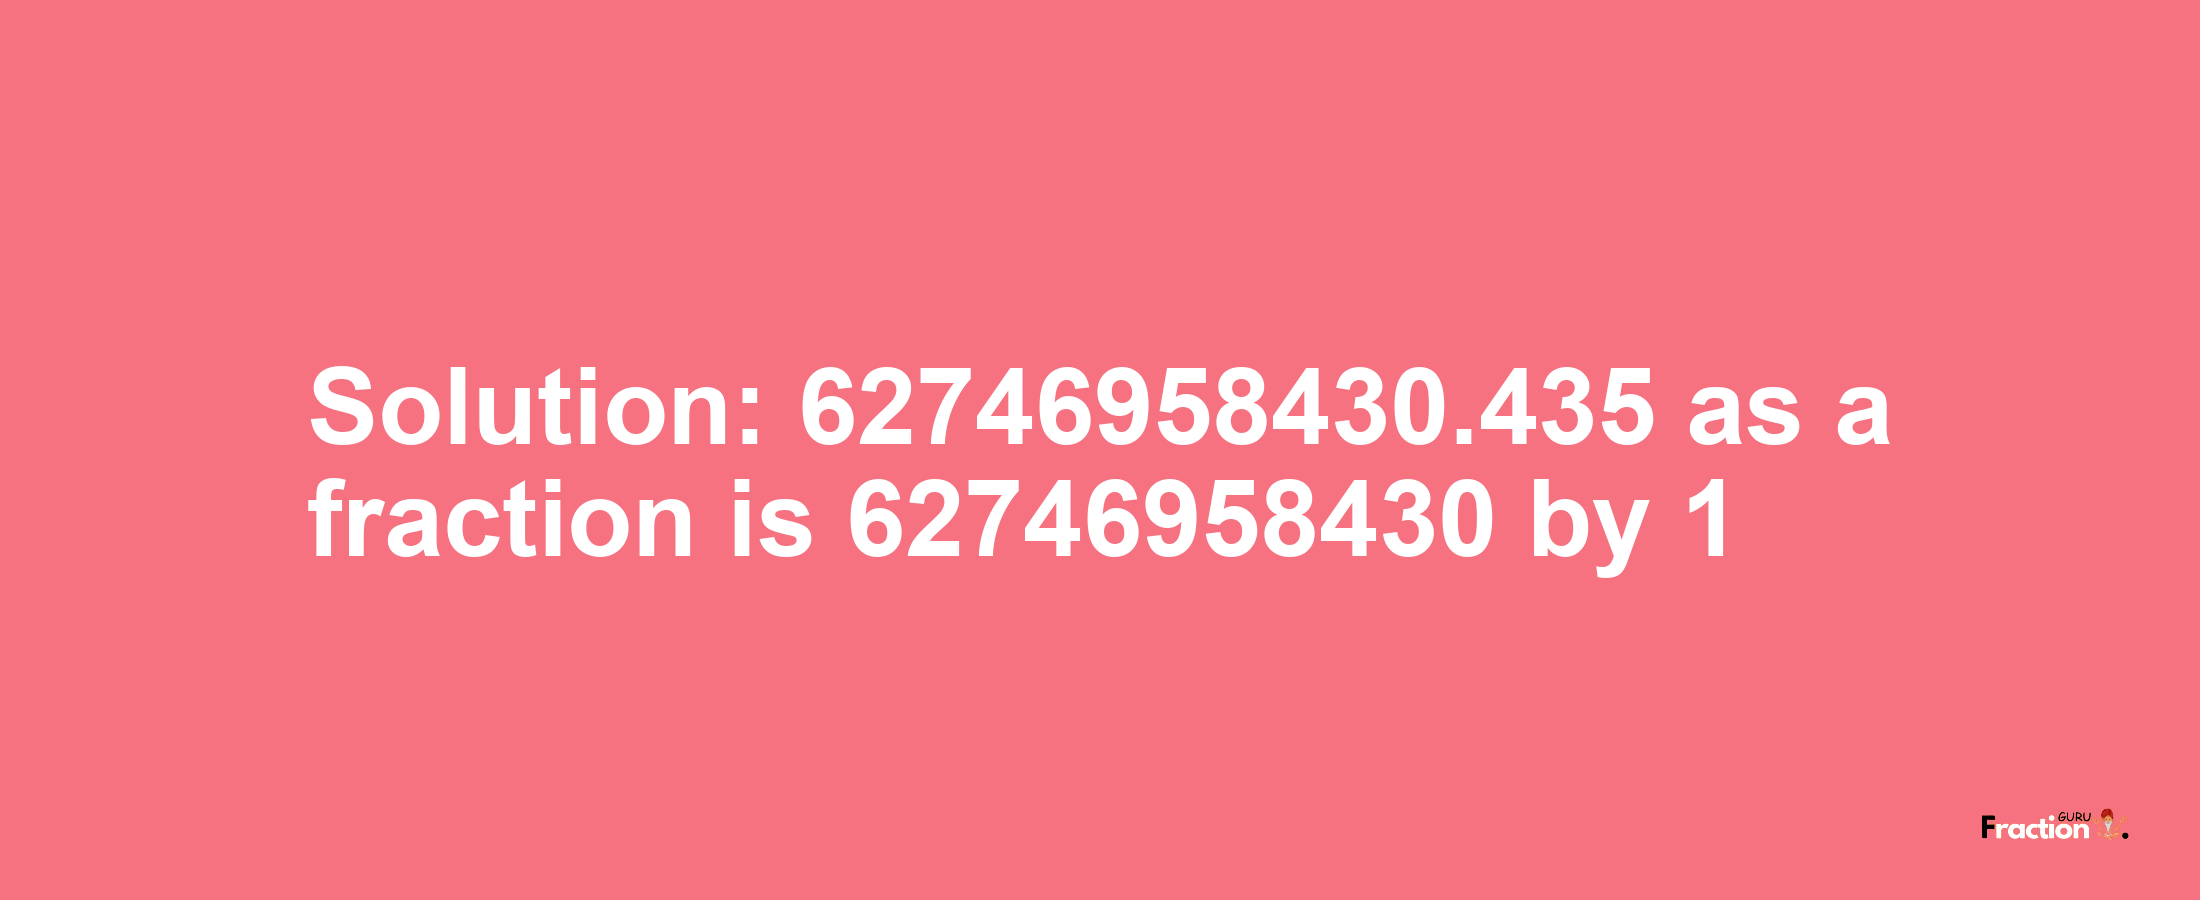 Solution:62746958430.435 as a fraction is 62746958430/1